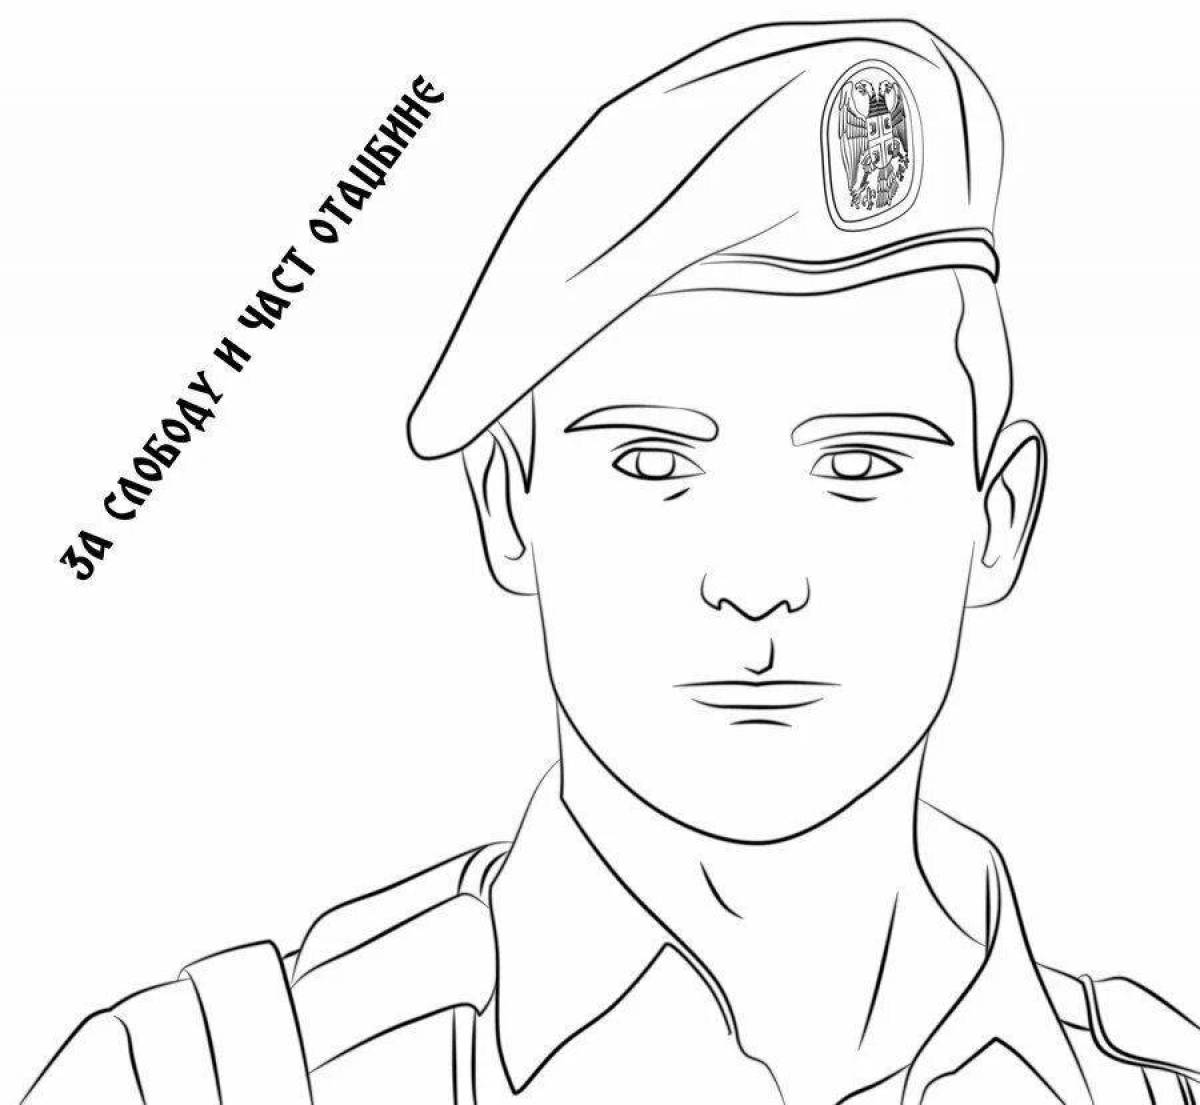 Amazing combat face coloring page